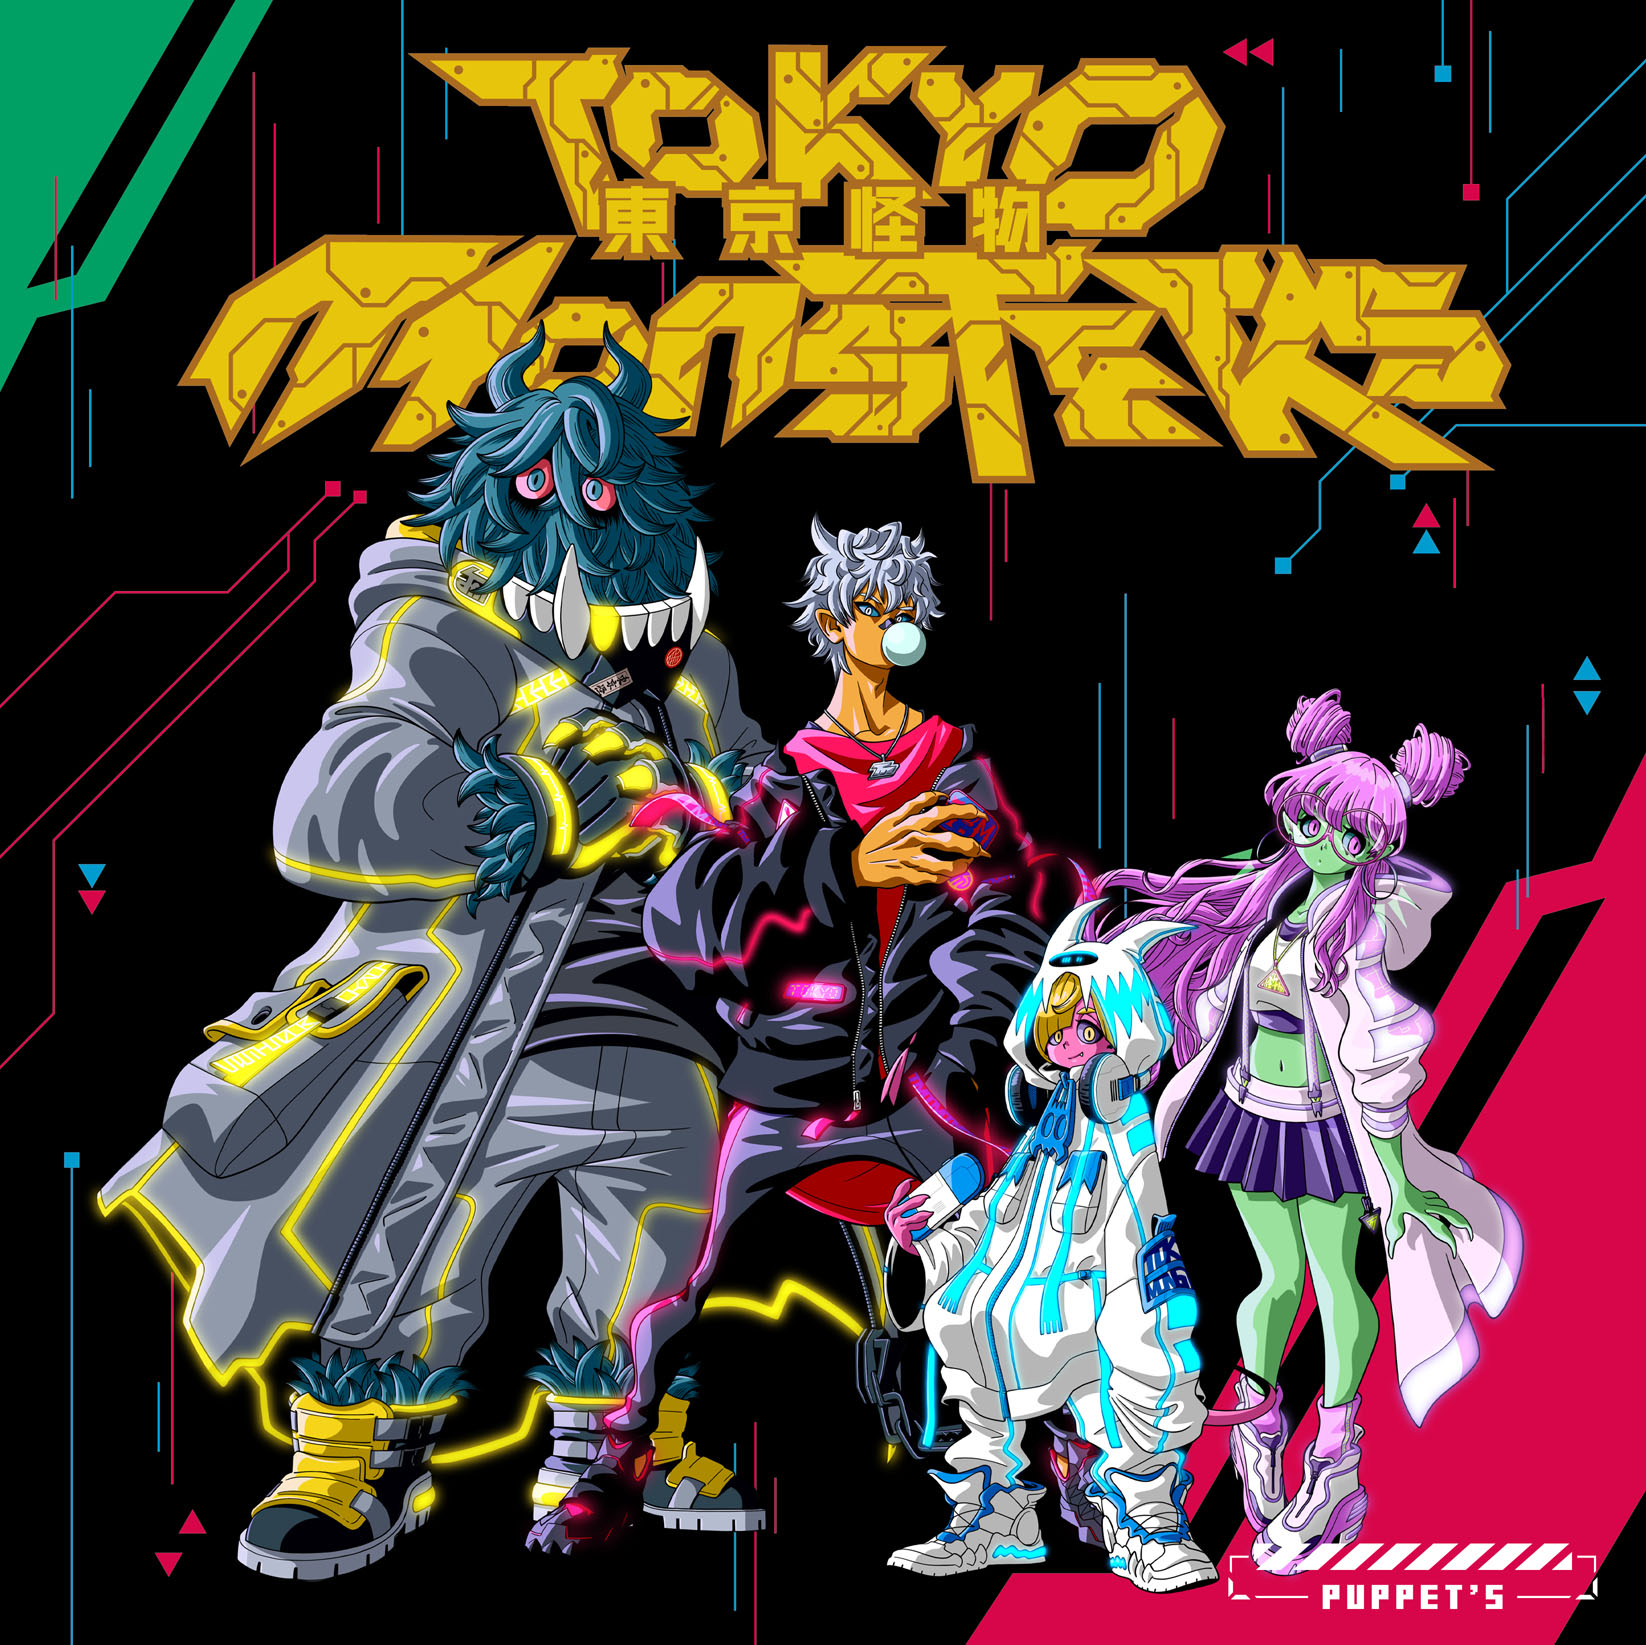 TOKYO MONSTERS - PUPPET'S